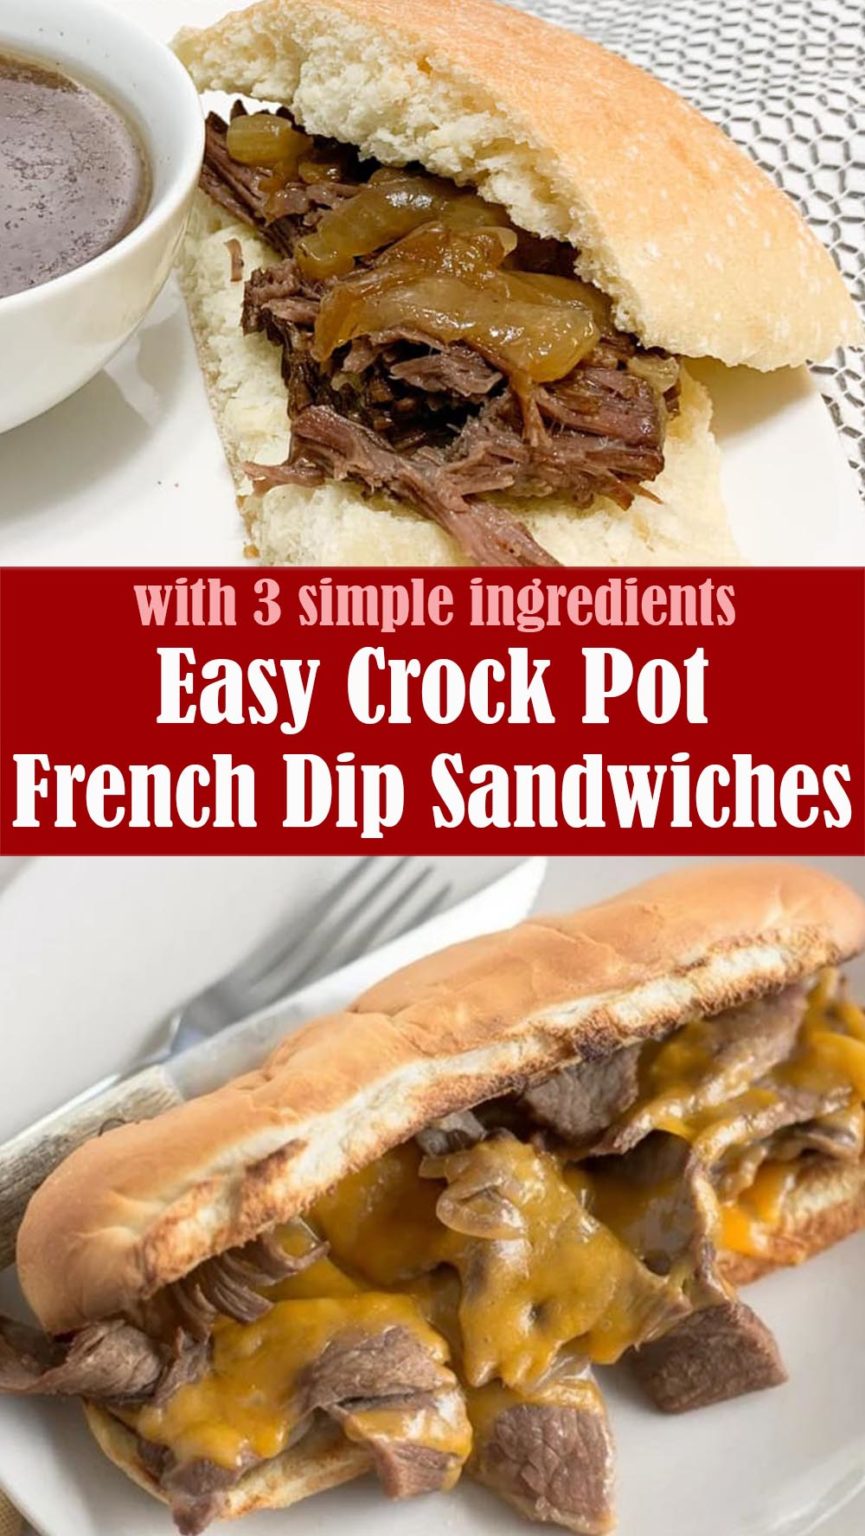 Easy Crock Pot French Dip Sandwiches – Reserveamana